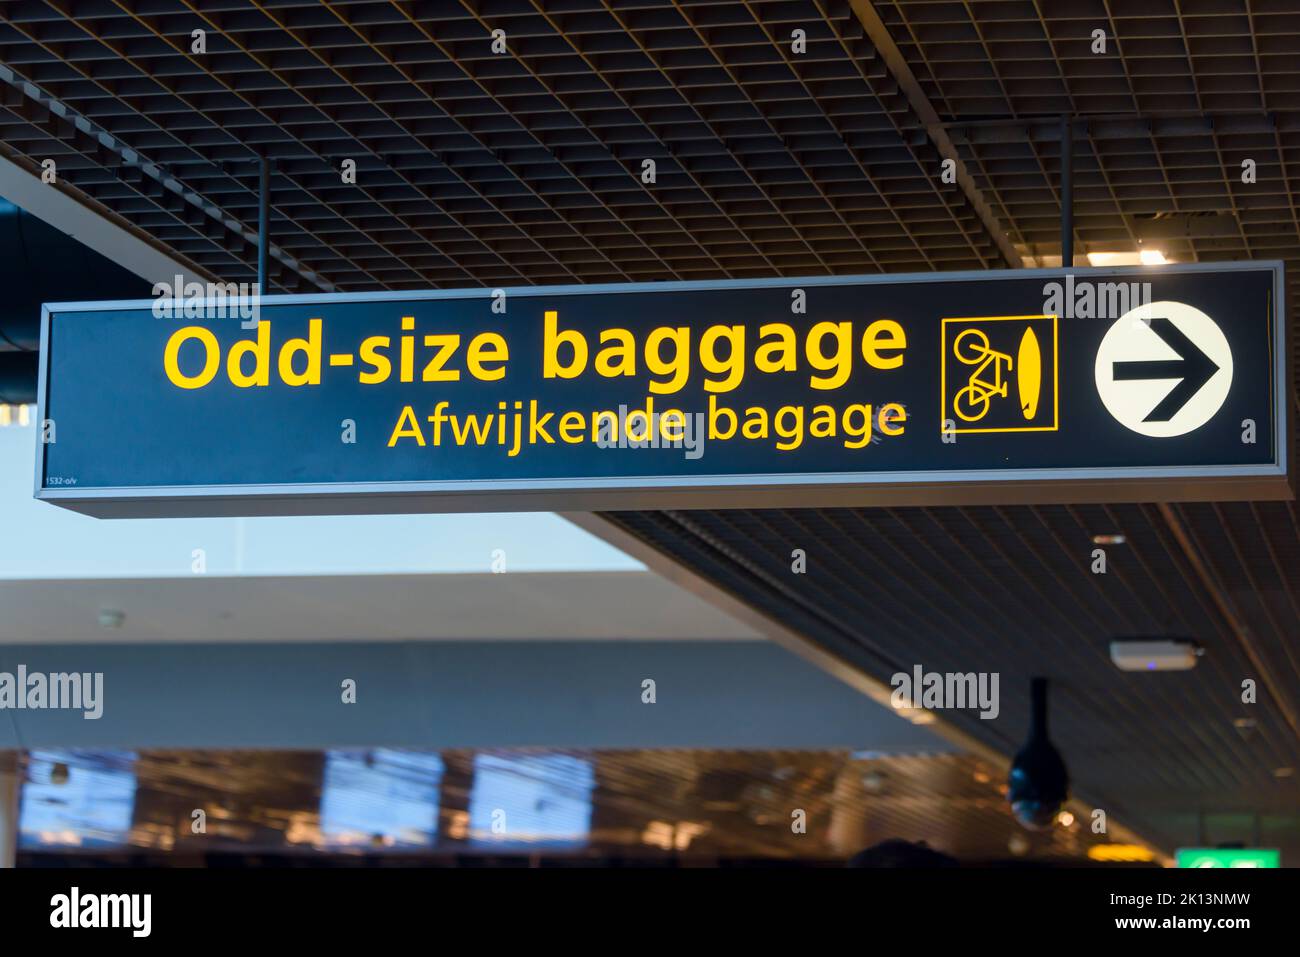 Sign for outsized odd-size baggage, Schiphol Airport, Netherlands Stock Photo